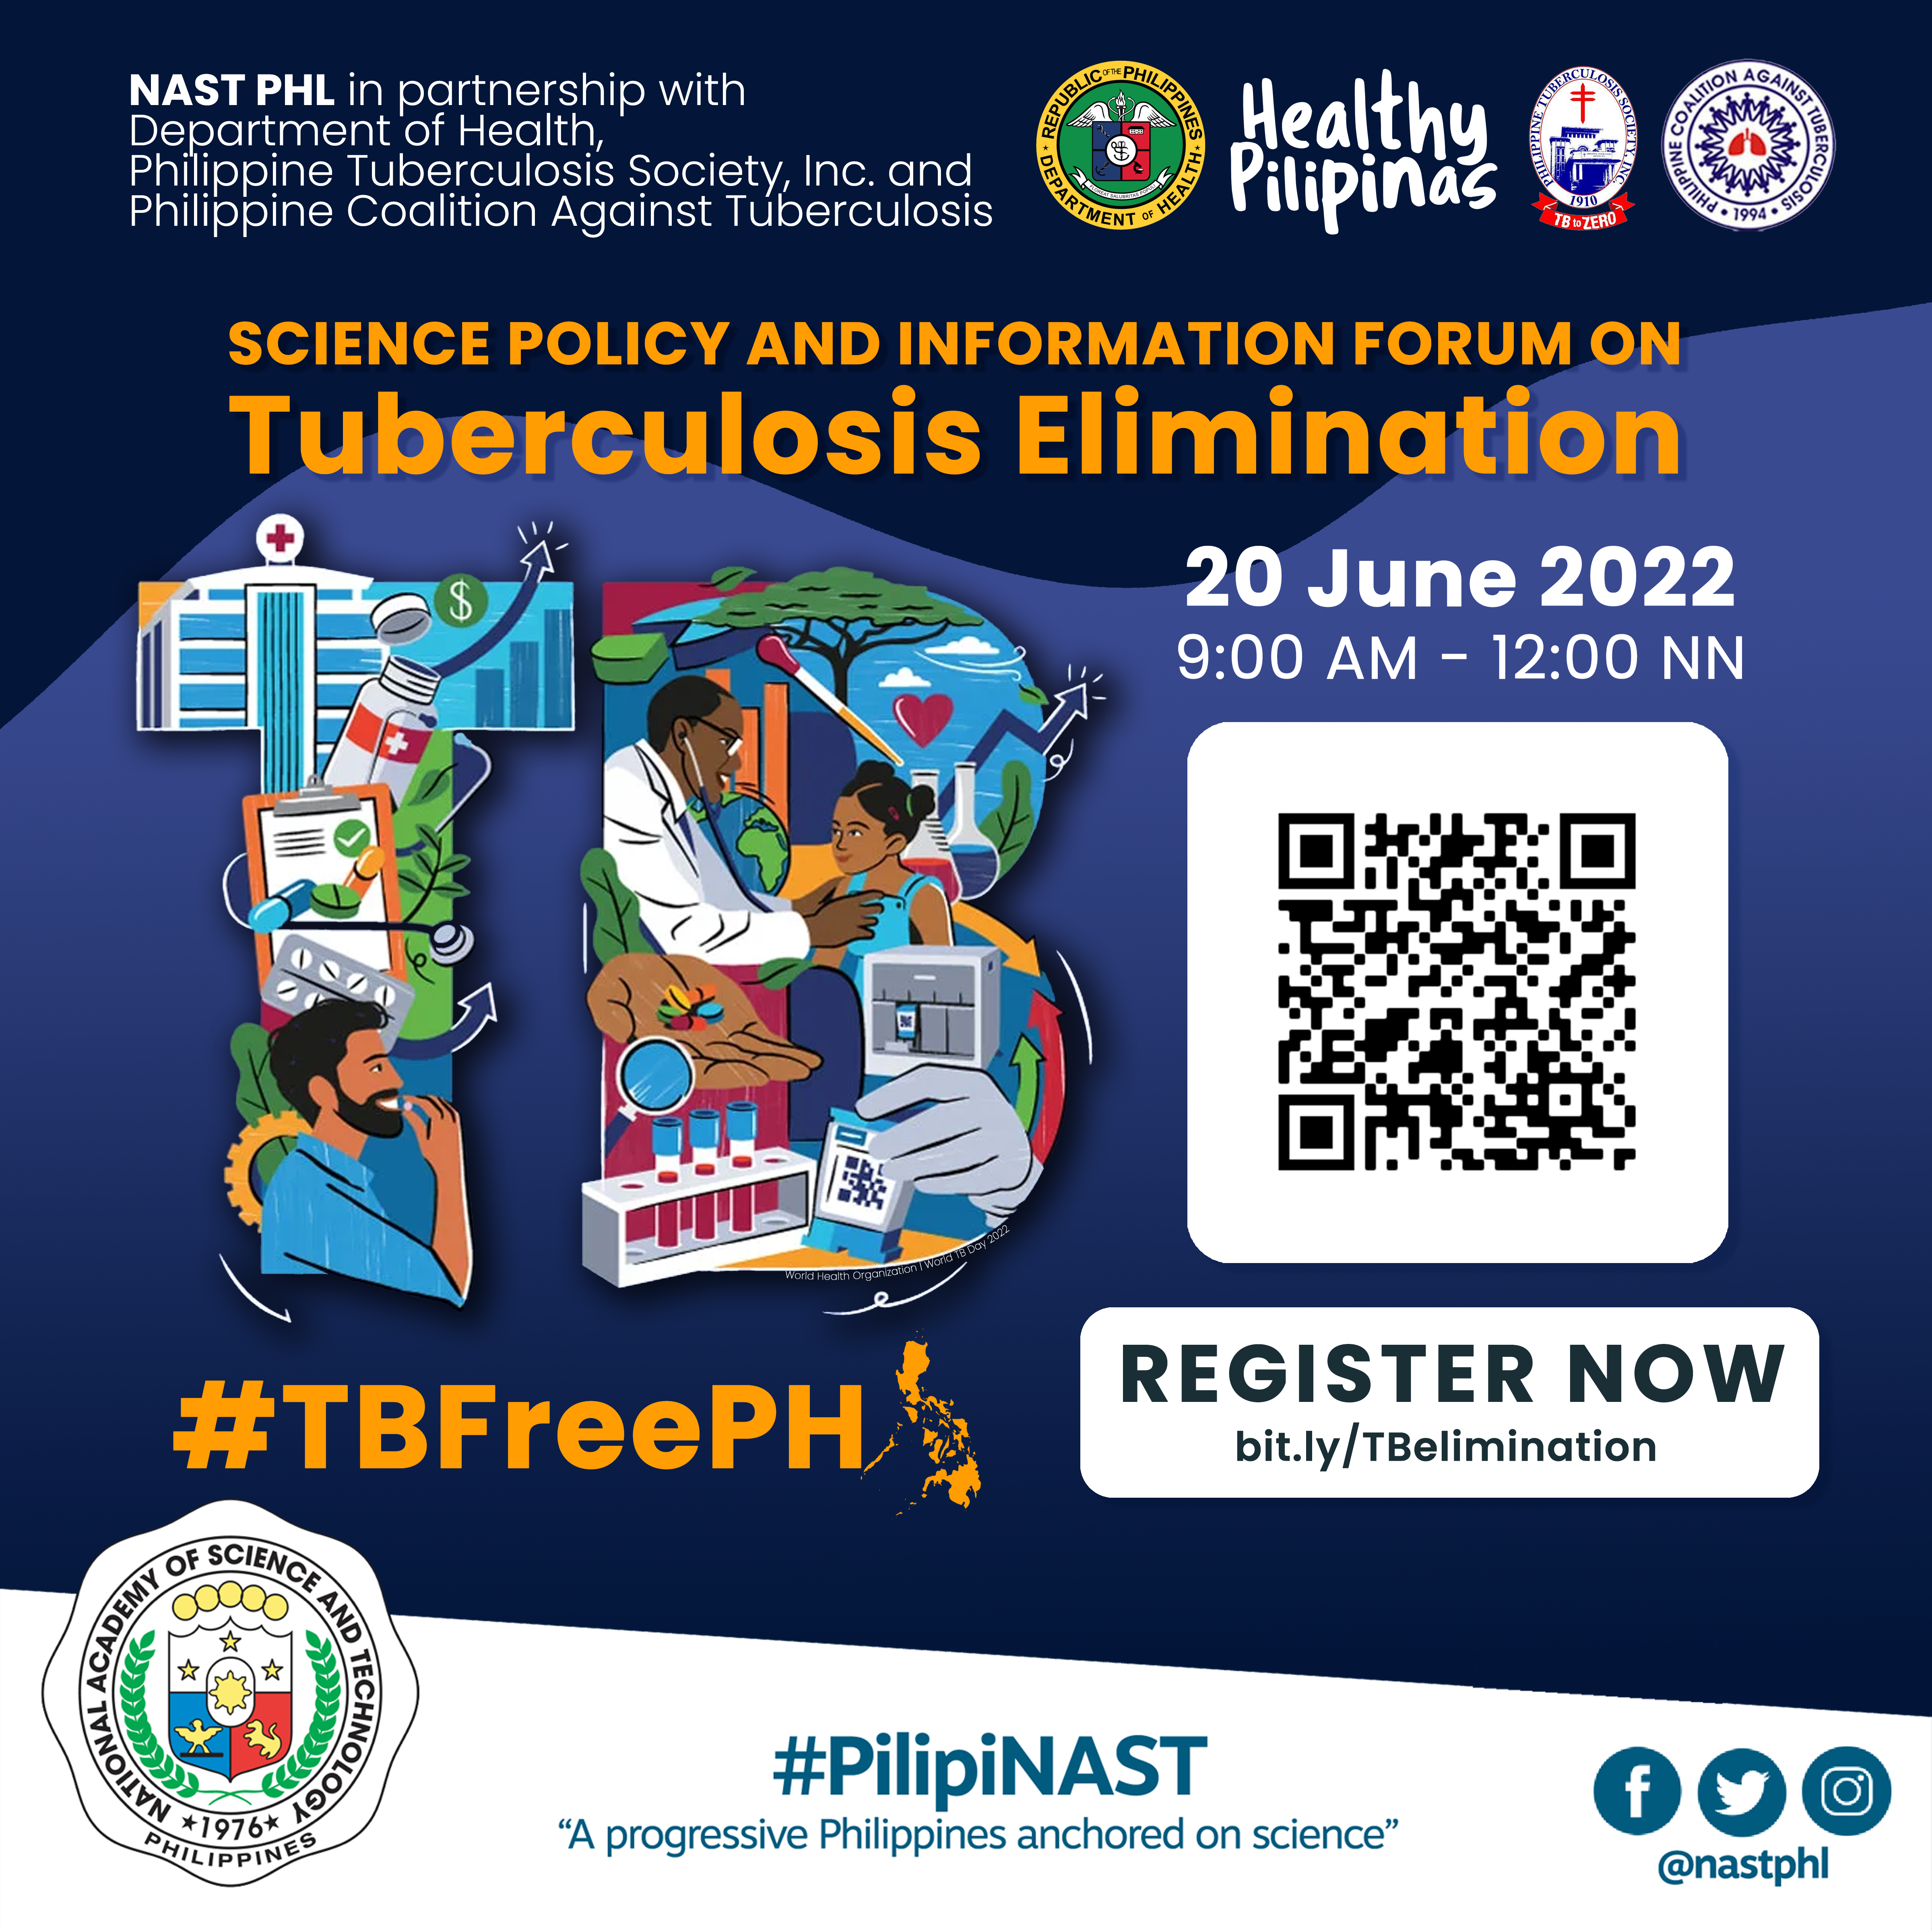 Science Policy and Information Forum on Tuberculosis Elimination